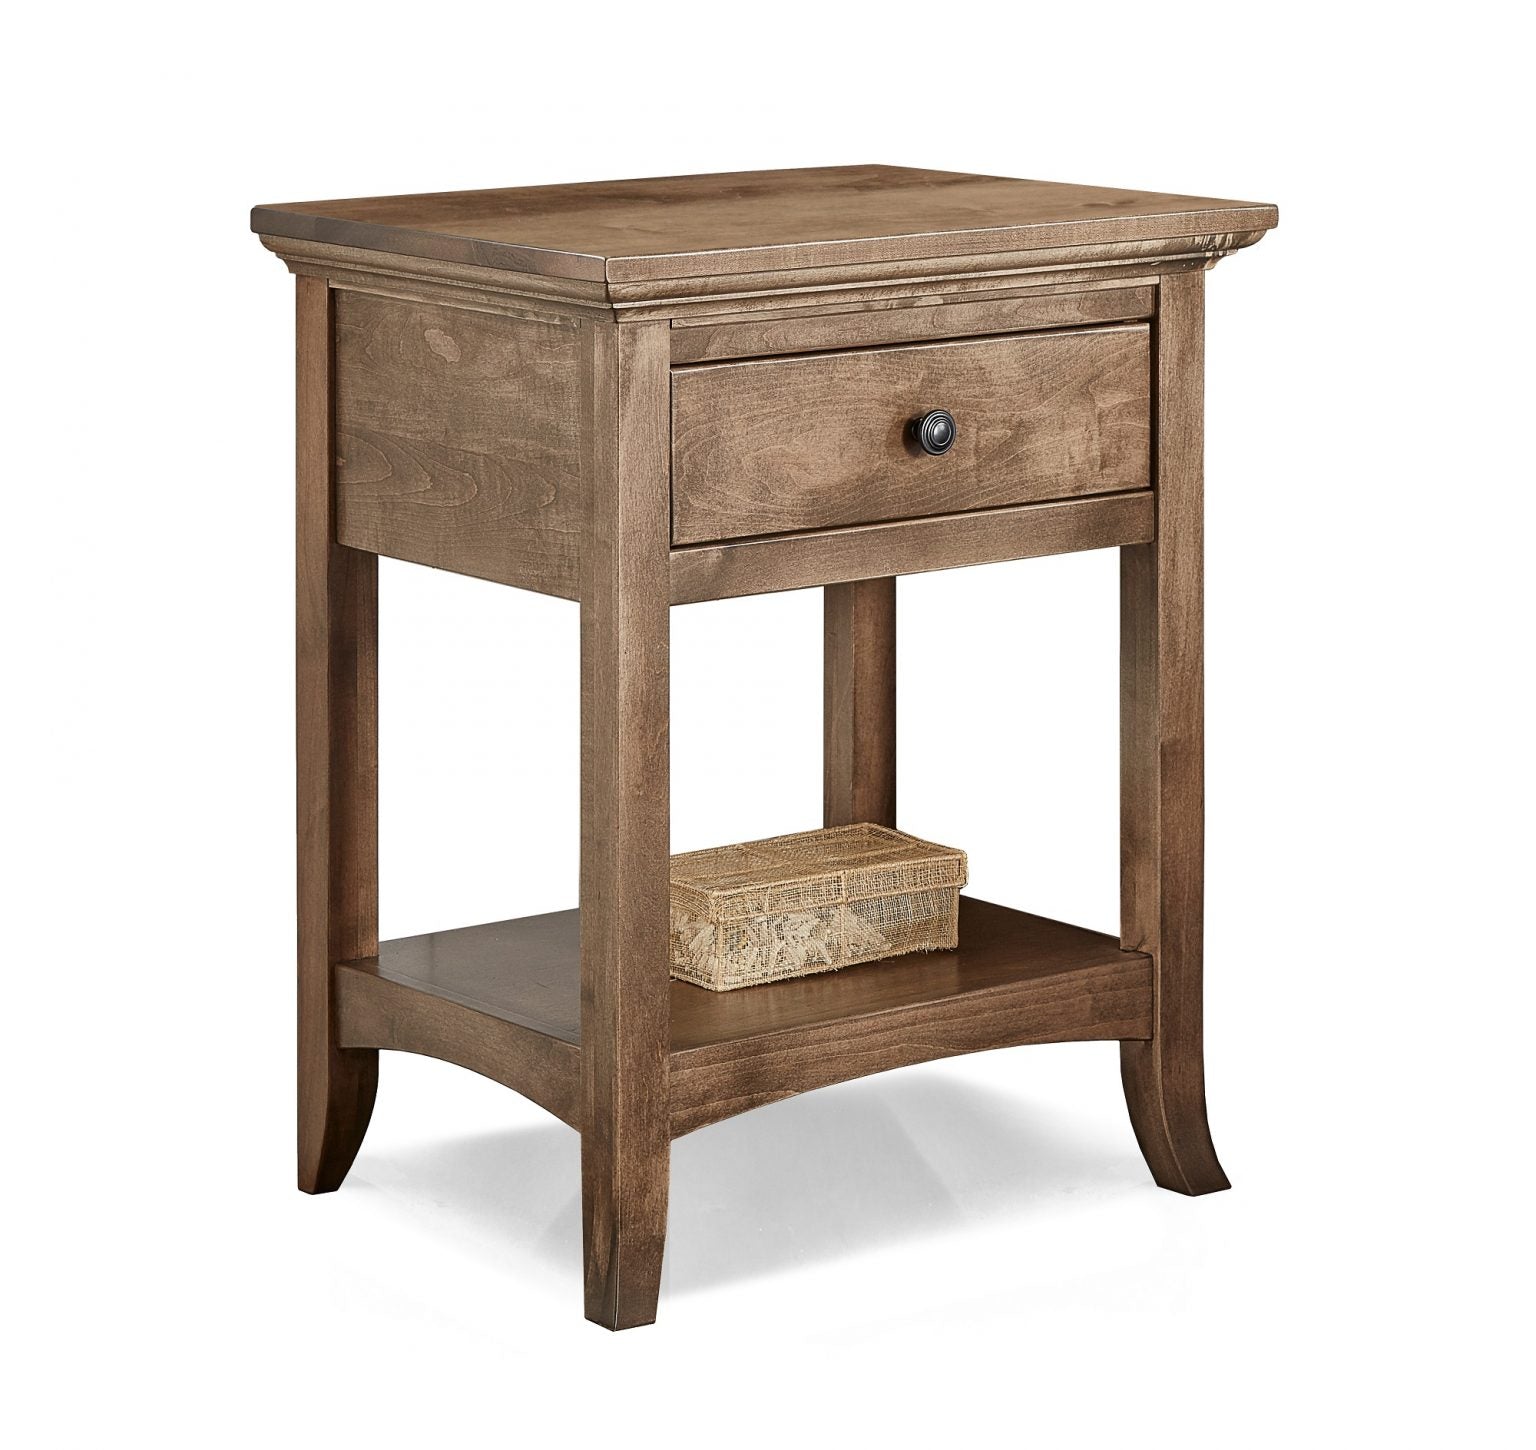 Provence 1 Drawer Nightstand - Baconco